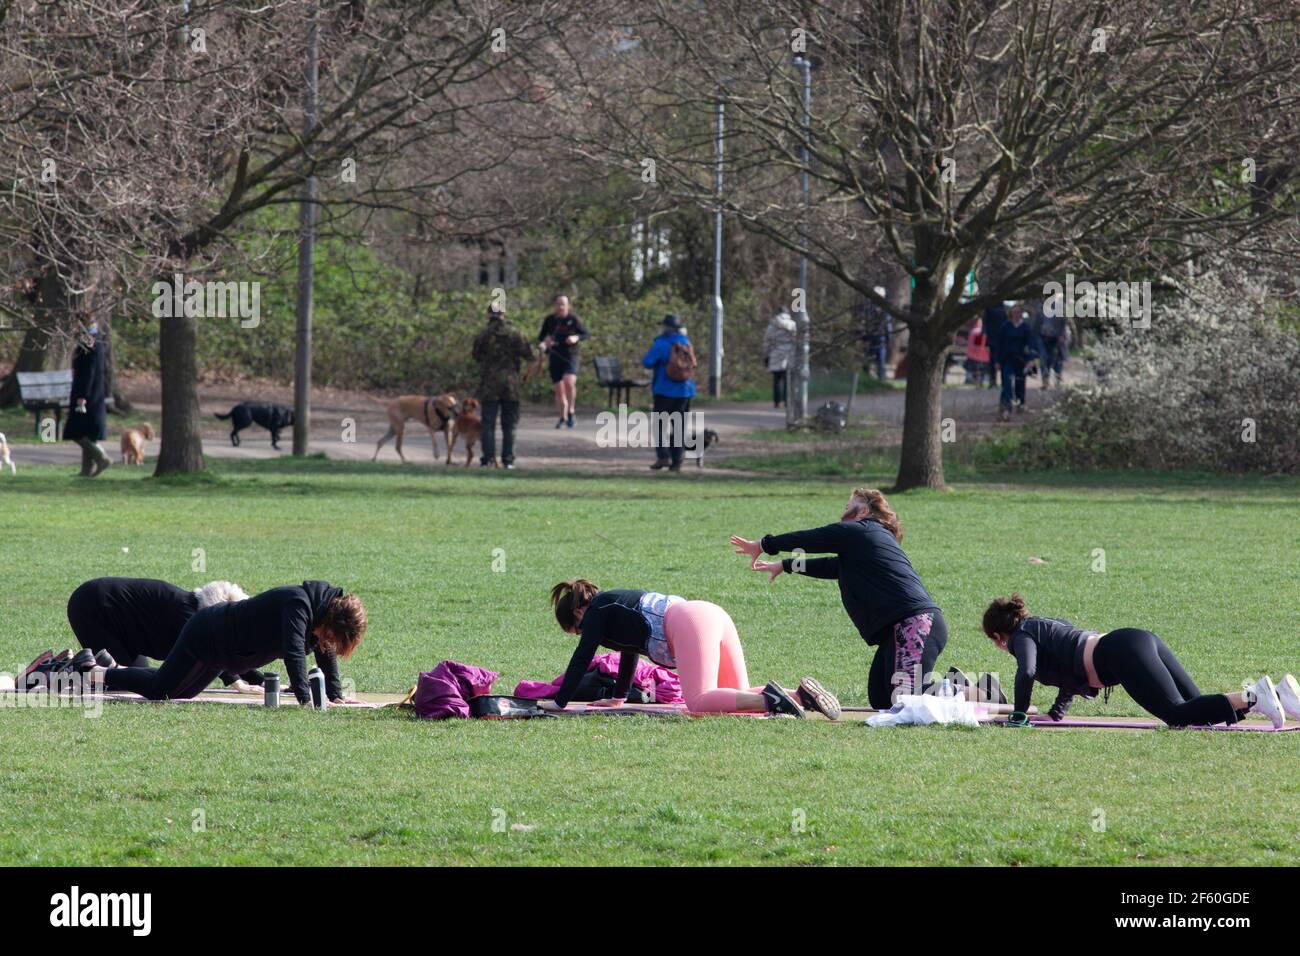 London, UK, 29 March 2021: On Tooting Commons a group of women take an outdoor exercise class, which from today is permitted under the gradual easing of lockdown rules in England. Anna Watson/Alamy Live News Stock Photo